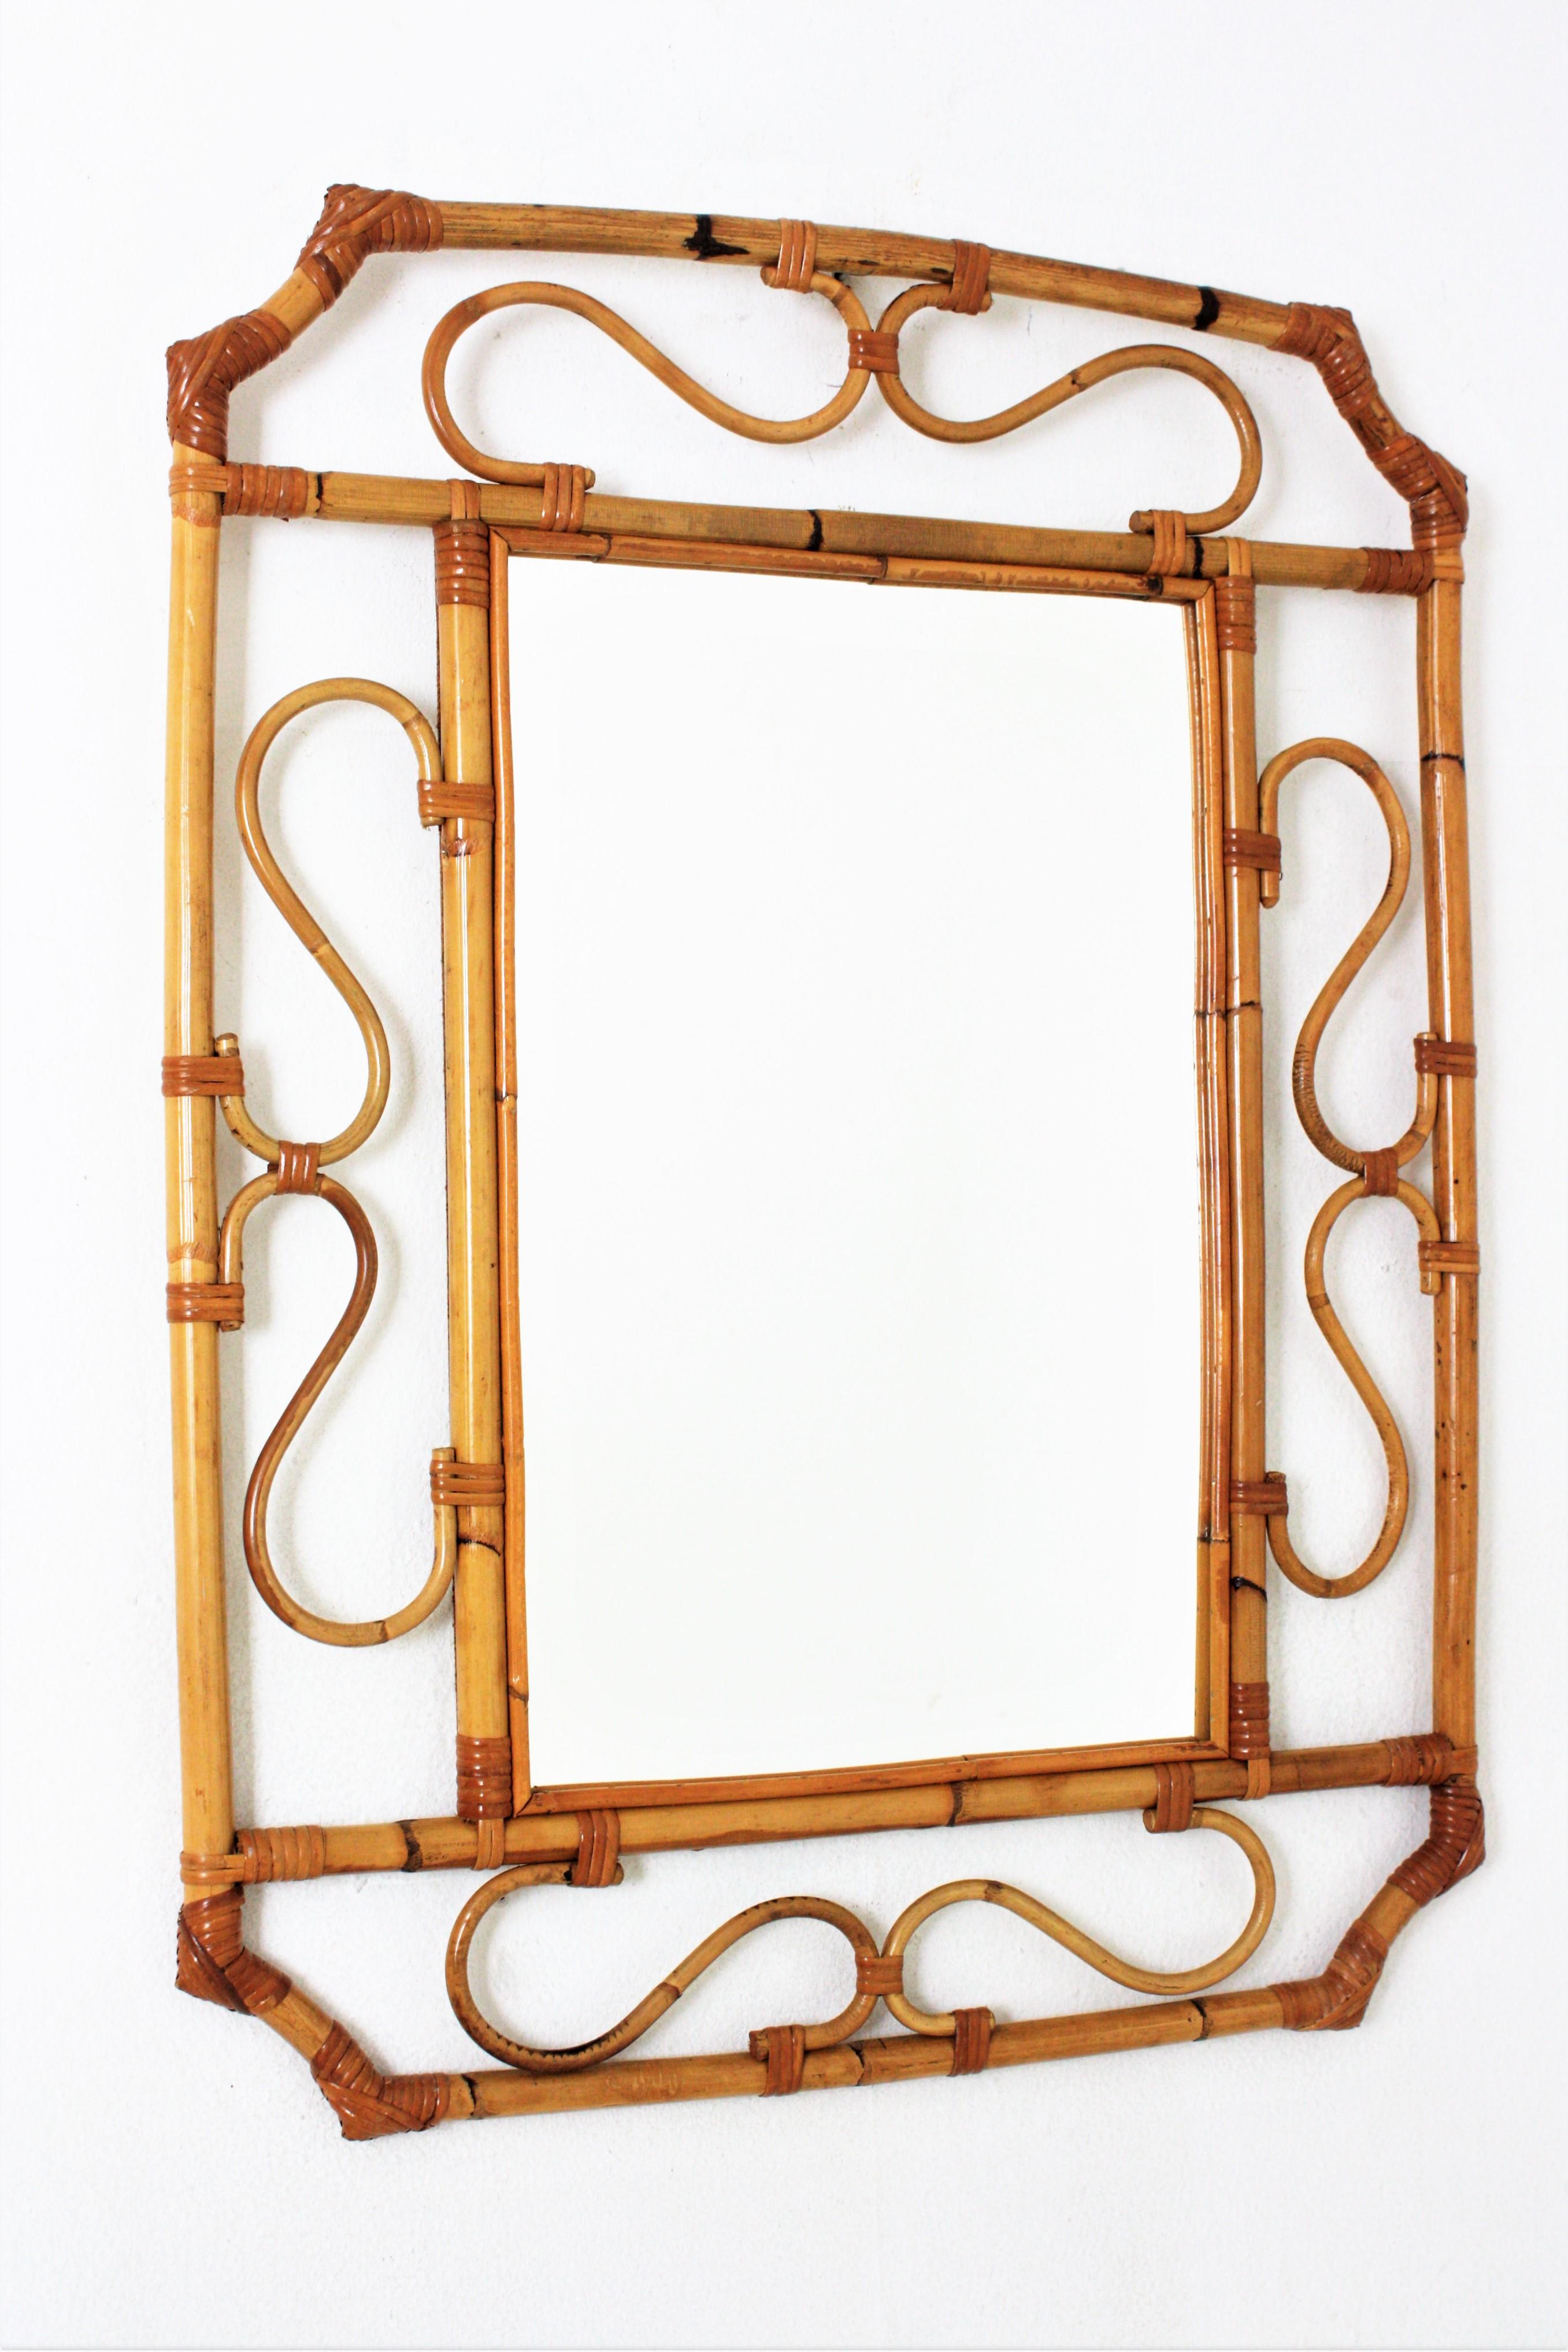 Rattan wall mirror, Franco Albini Style. Italy, 1960s.
An octagonal  frame with scrolled decorative details surrounding a rectangular central glass.
This piece has all the taste of the Italian Riviera and it is perfect to be placed alone or mixed